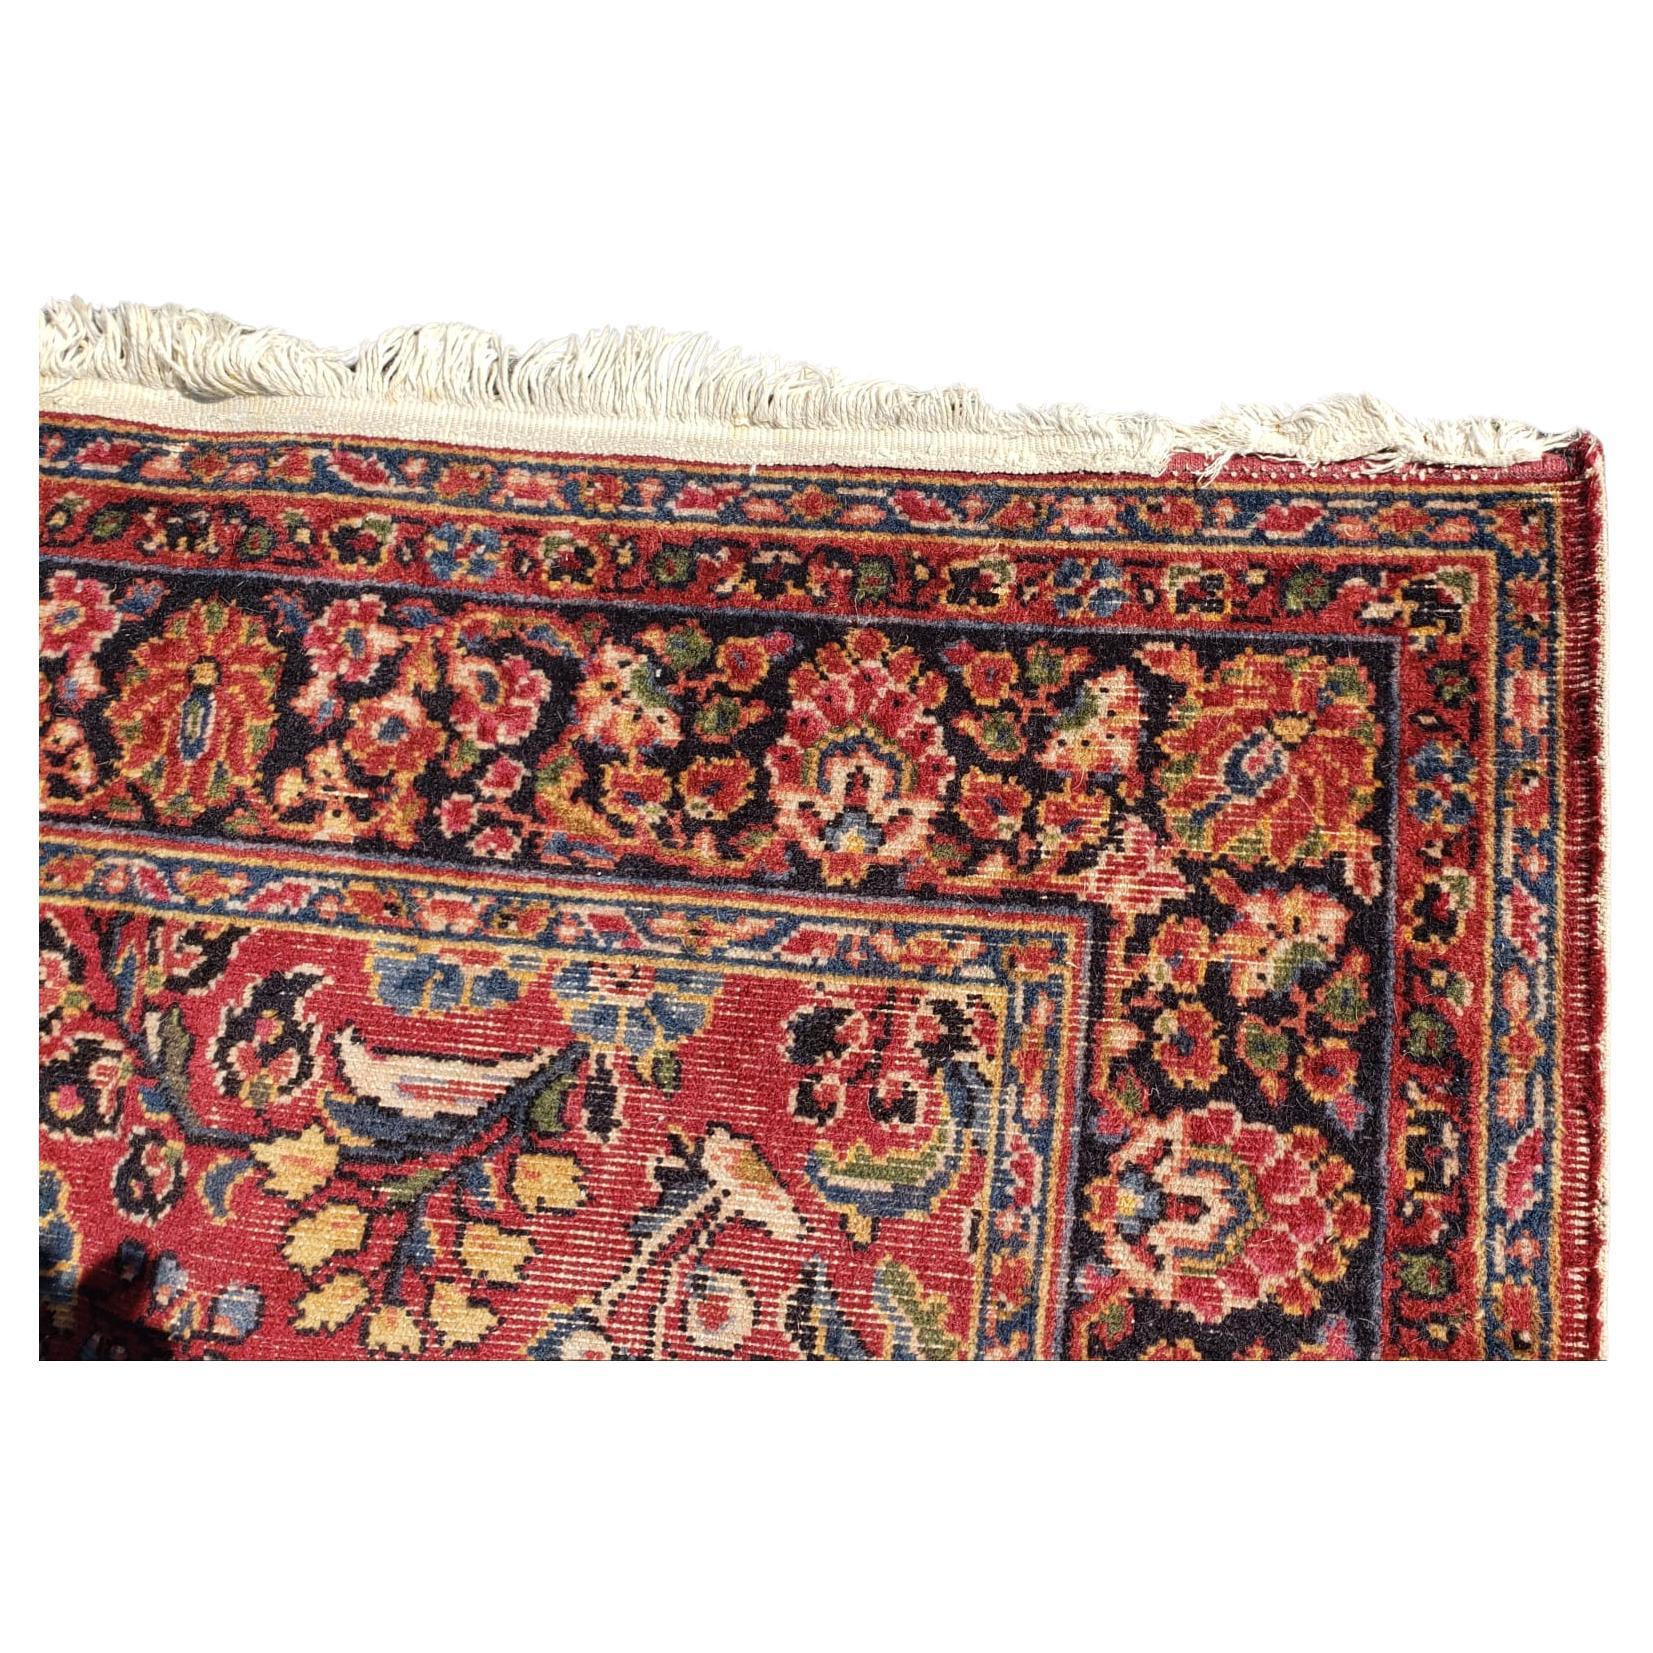 An outstanding early 20th century Sarouk rug with a traditional all-over floral pattern woven in rich indigos, cranberries, and darks colors, and surrounded by one of the best floral pattern borders we've seen in a long time! Measures 9' x 6.'